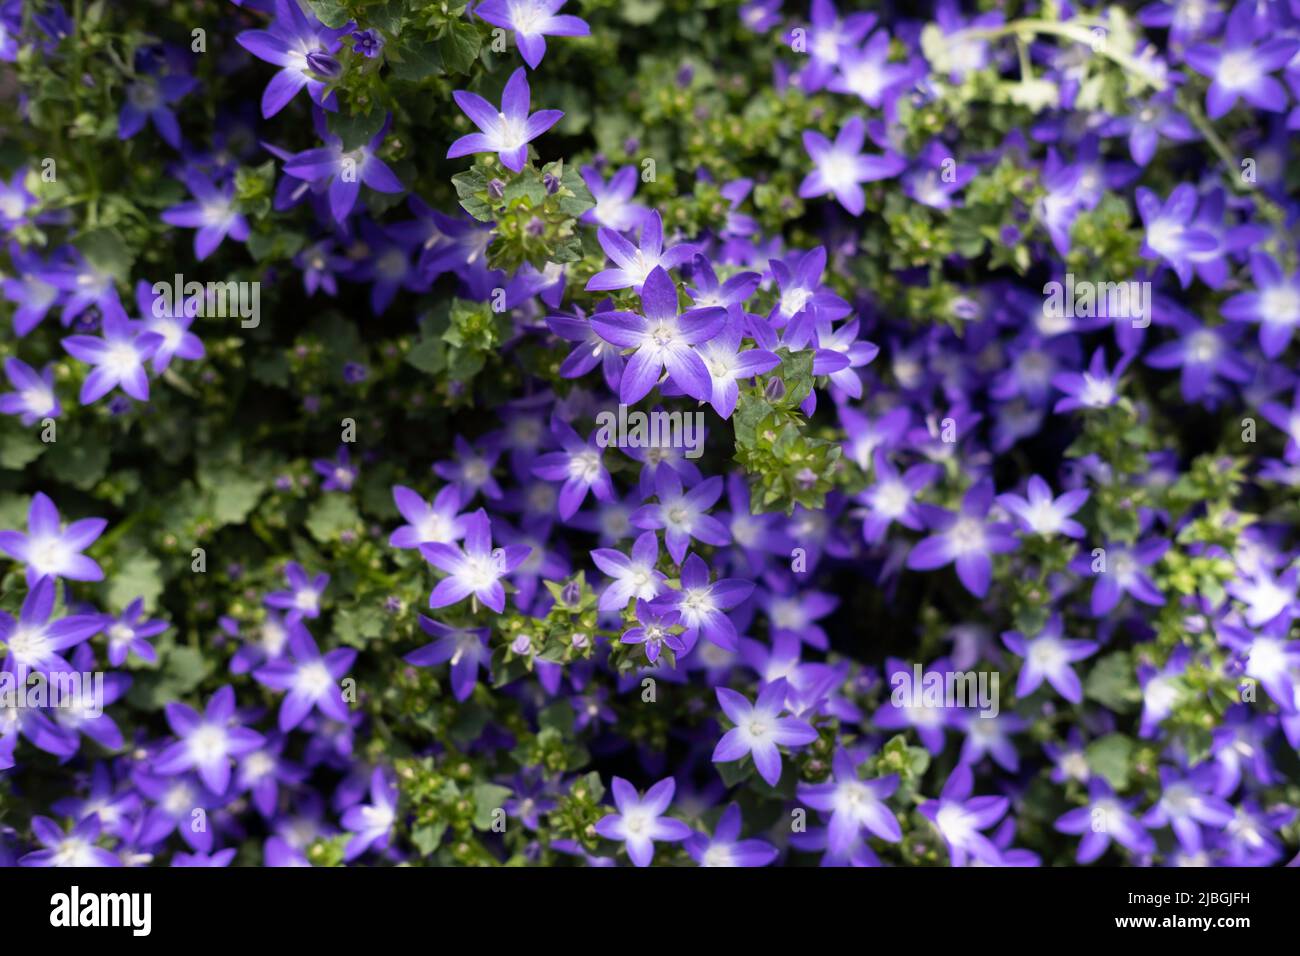 Garden blue bellflower (Campanula Carpatica) around green leaves blooming in summer. Seen from above. Focus on the Campanula flowers in the center Stock Photo